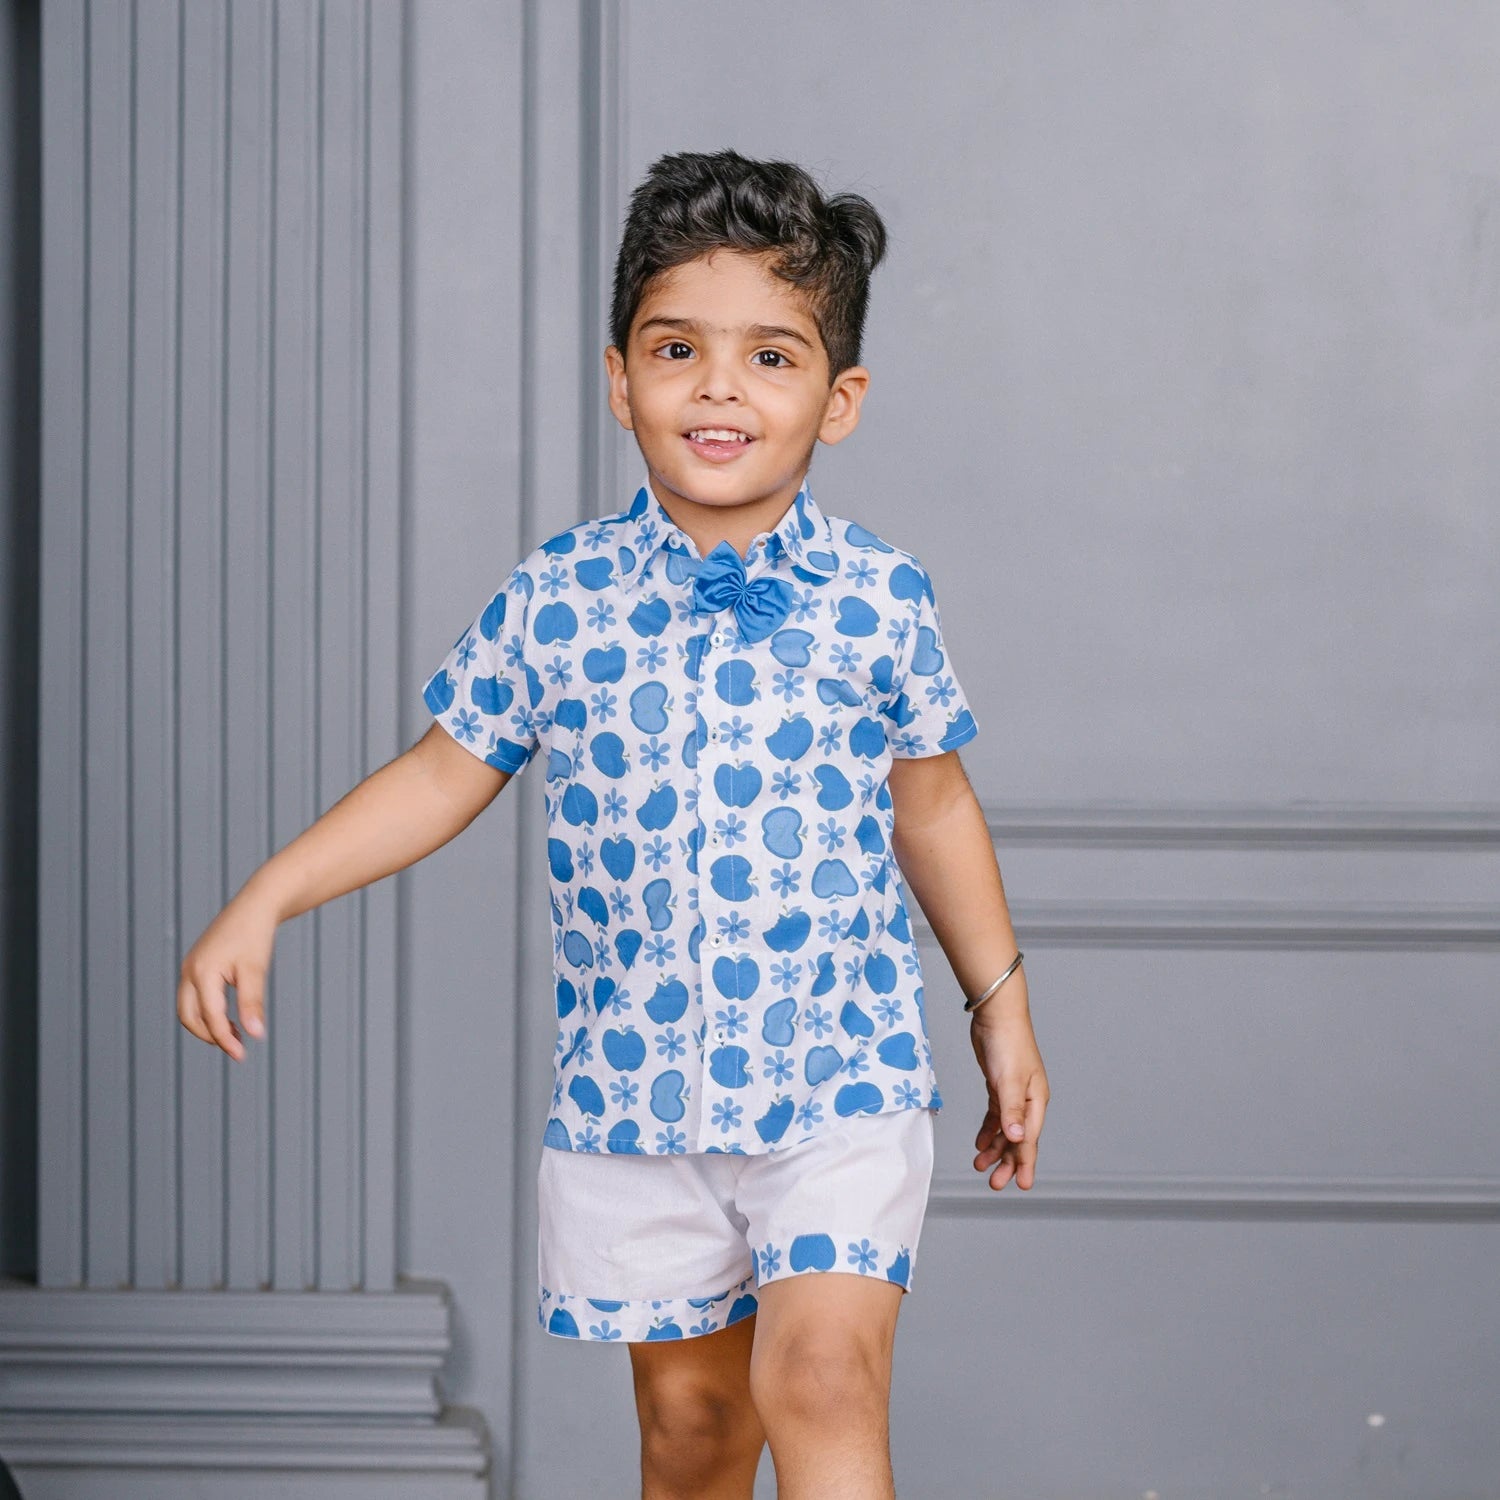 BLUE APPLE PRINT SHIRT PAIRED WITH WHITE SHORTS